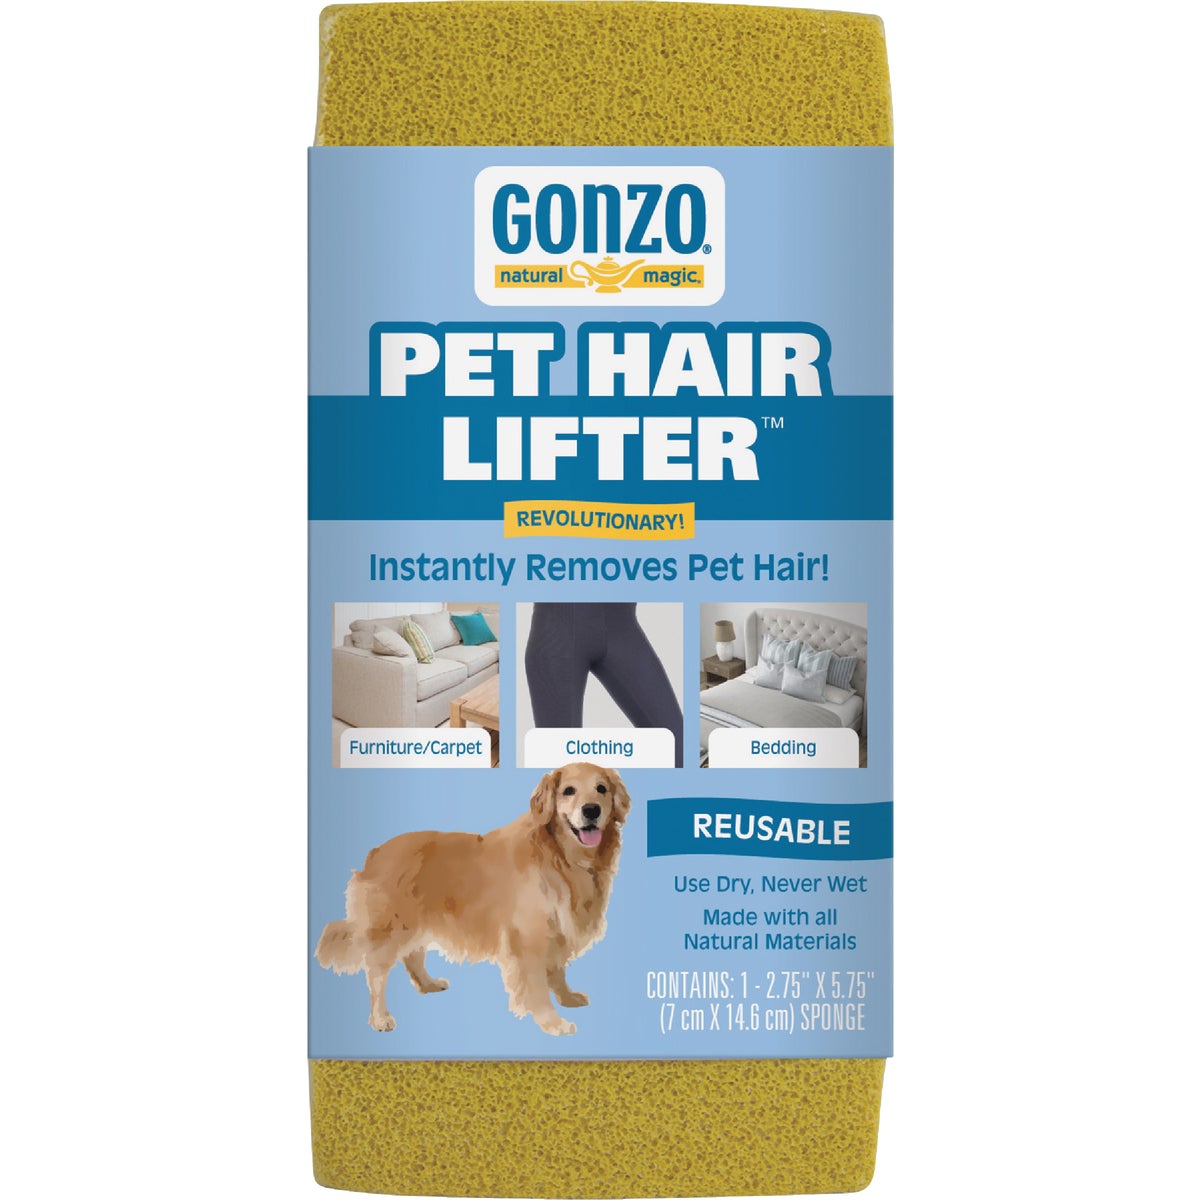 Item 614909, Instantly removes pet hair from carpets, upholstery, clothing, drapes, 